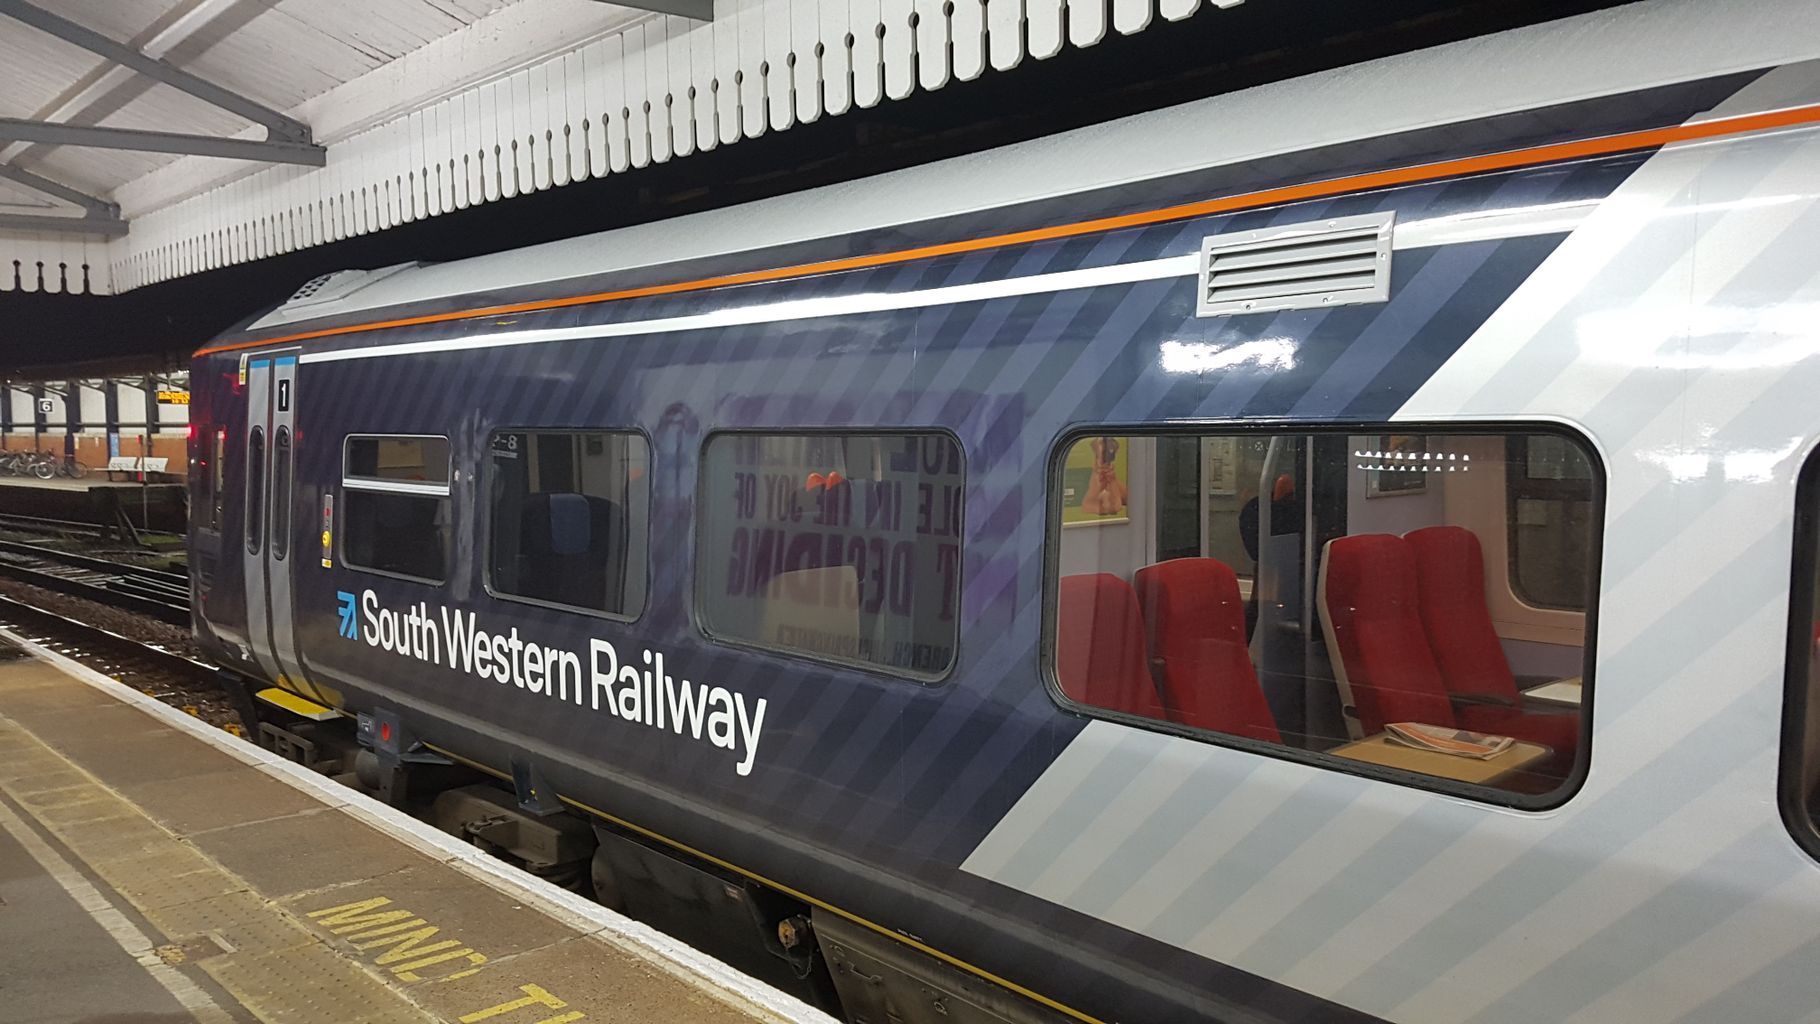 south western railway travel with confidence